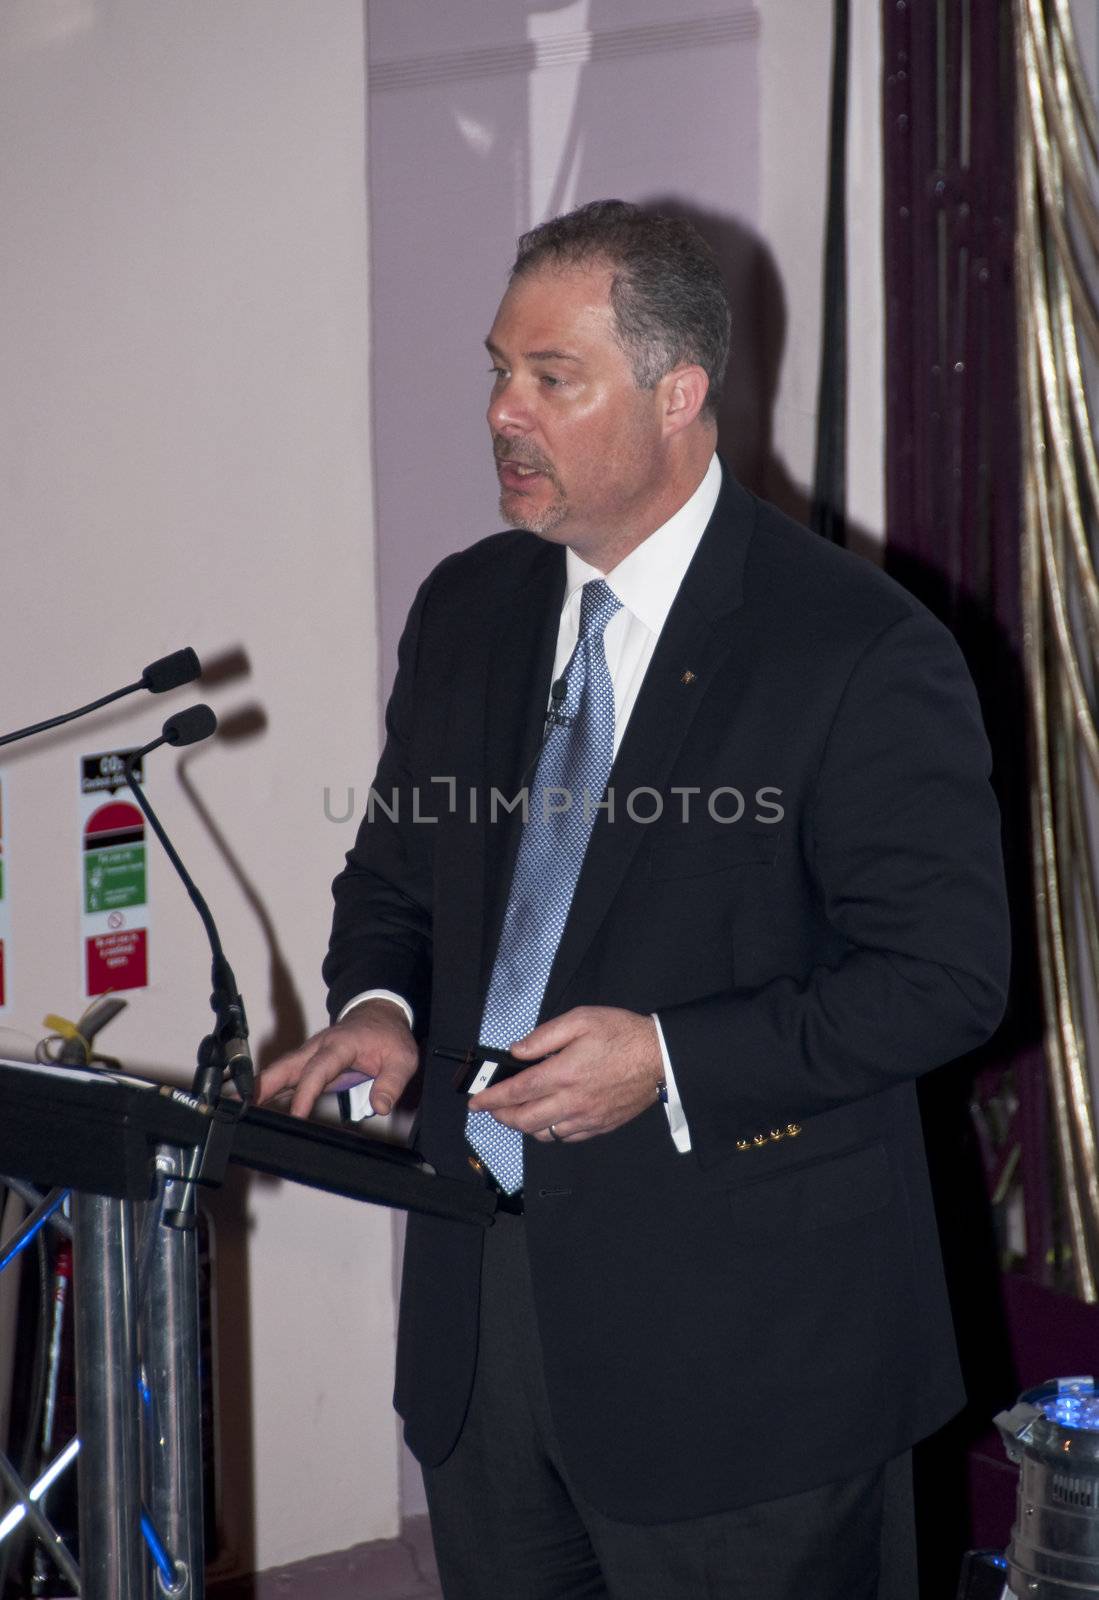 London - UK, January 30, 2012: Gerald Parent giving a speech at the 59th UICH les Clefs d'Or International Congress at the Sheraton Park Lane